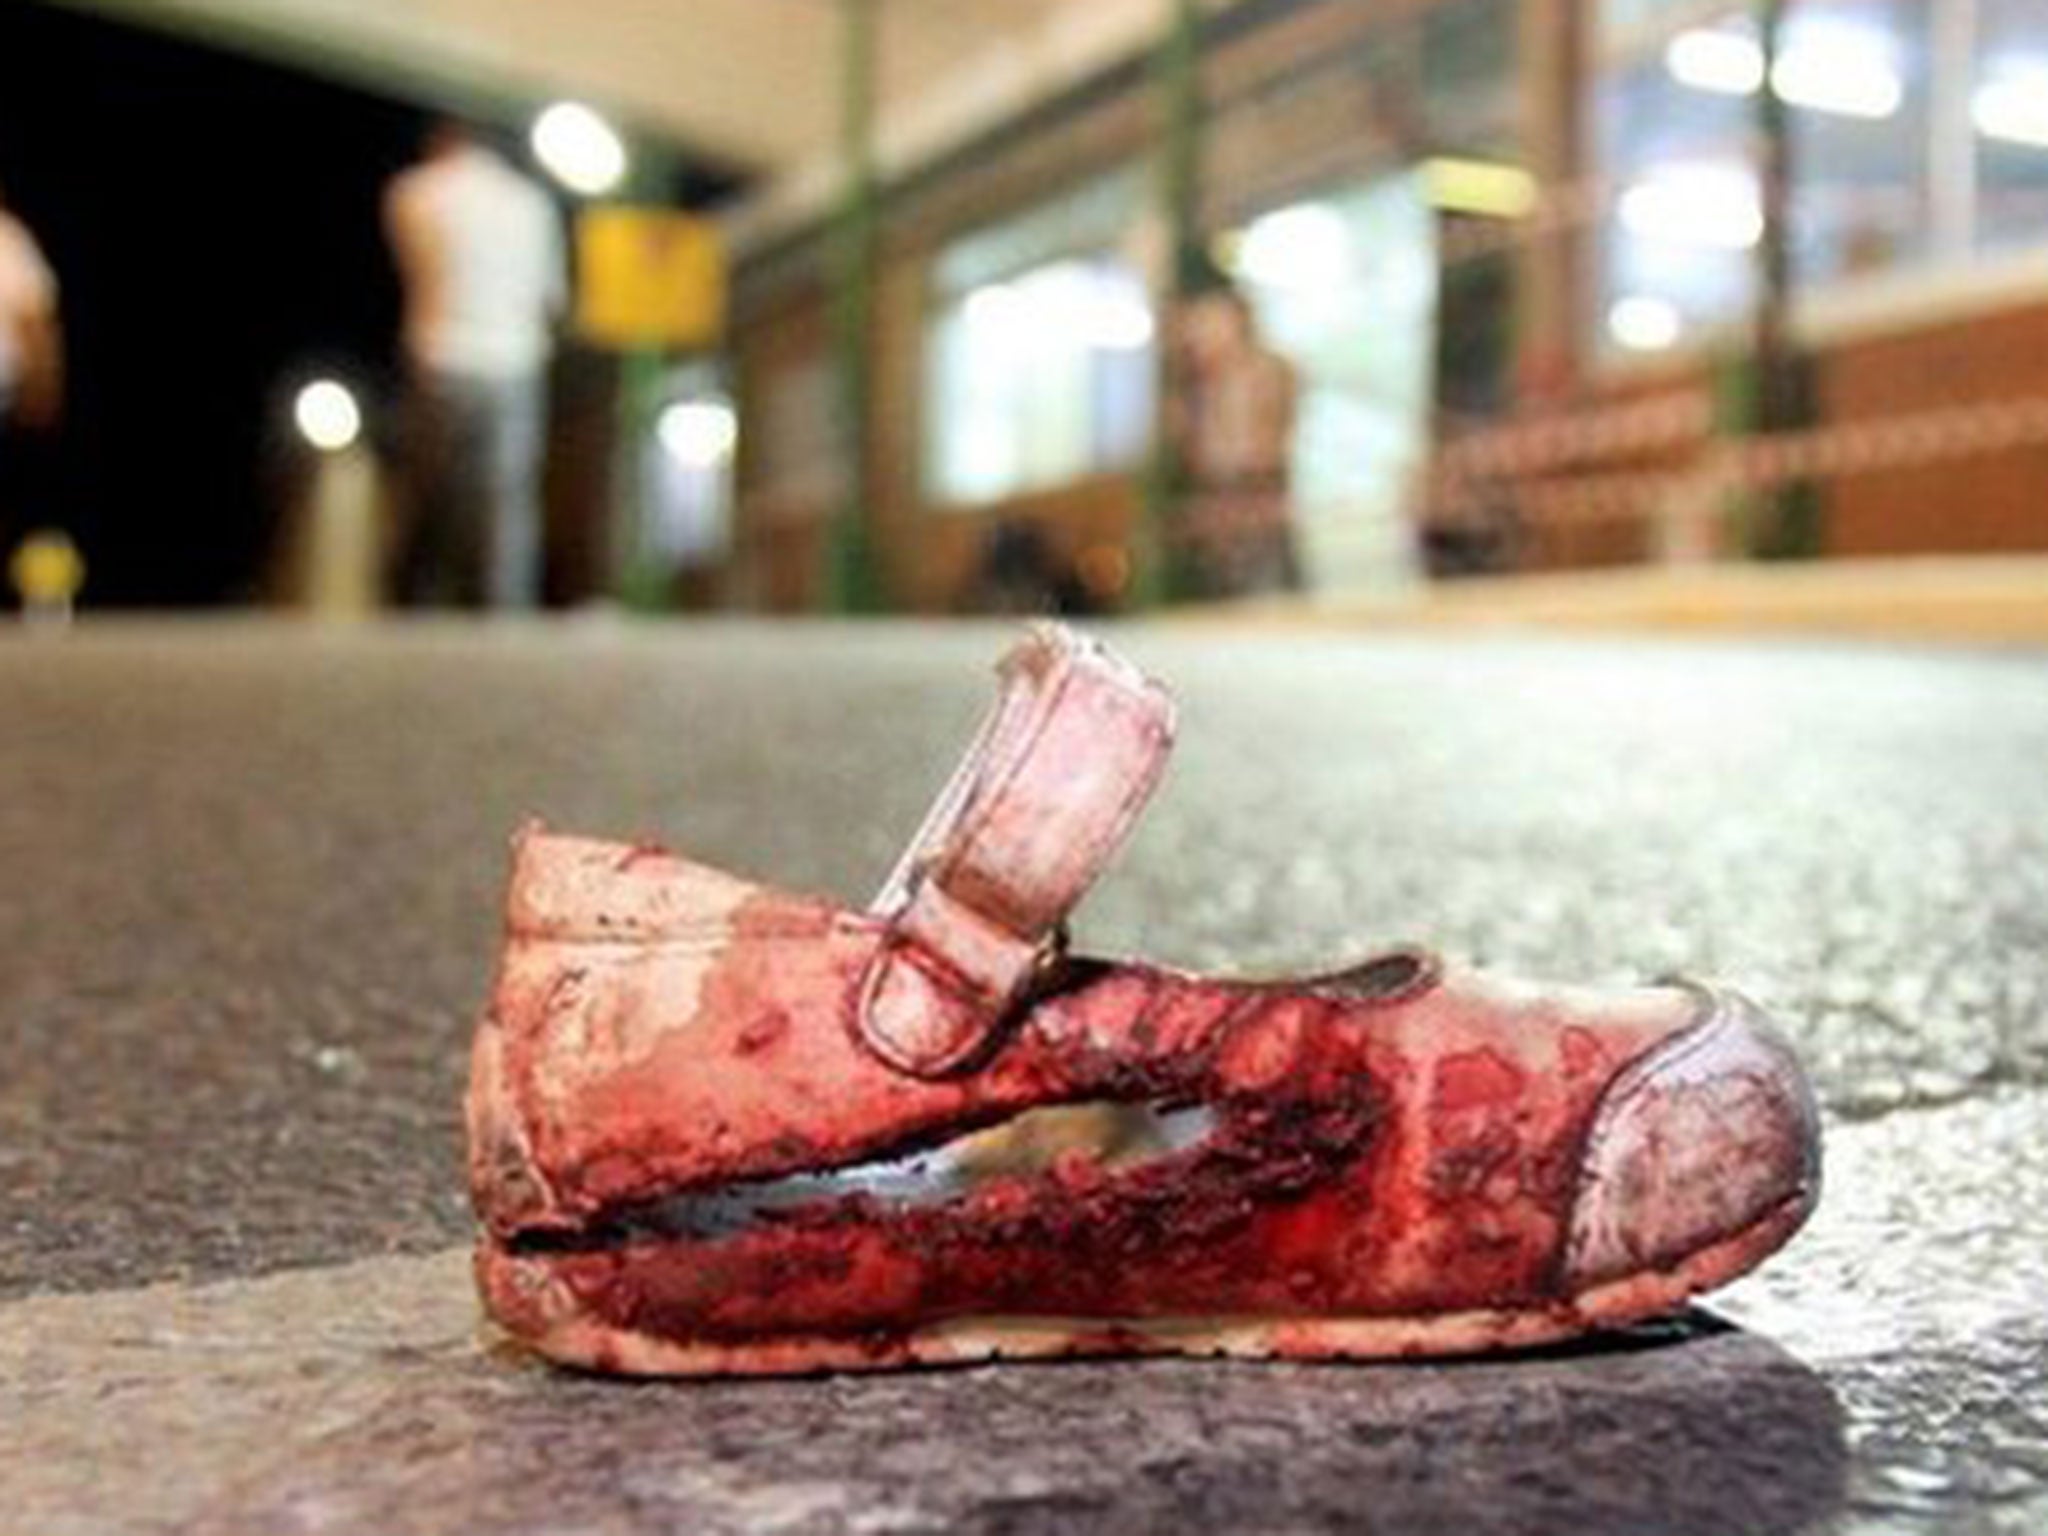 This picture, taken in Ashkelon in 2008, shows the same bloody shoe